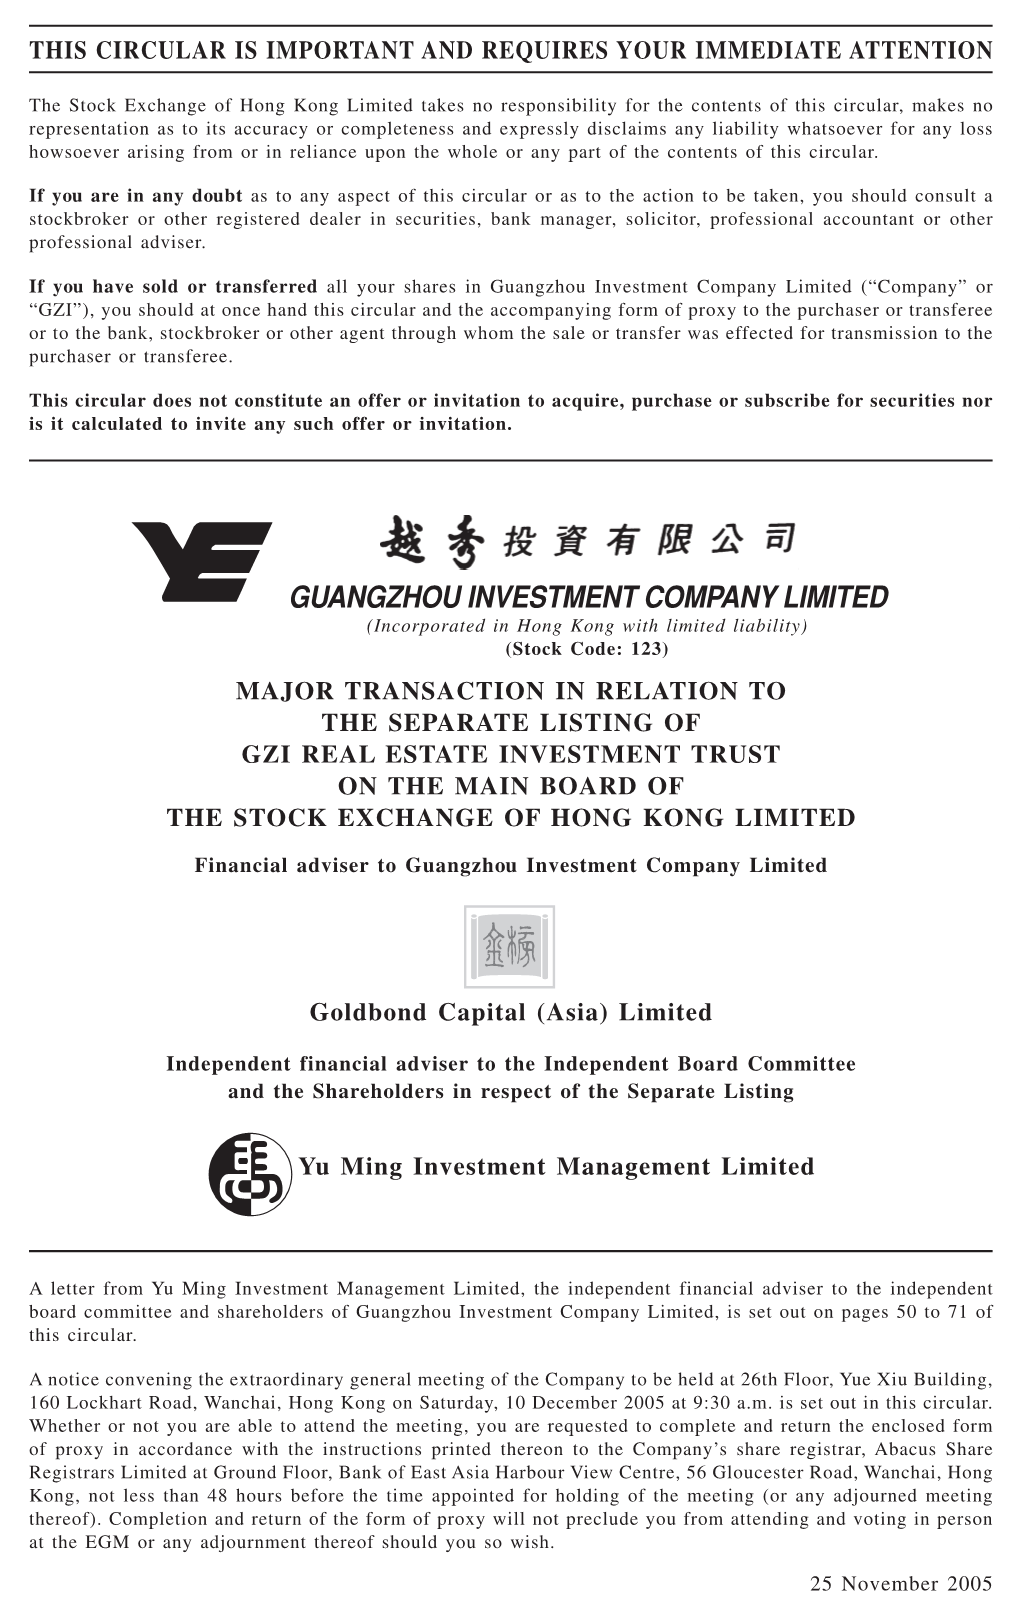 Major Transaction in Relation to the Separate Listing of Gzi Real Estate Investment Trust on the Main Board of the Stock Exchange of Hong Kong Limited